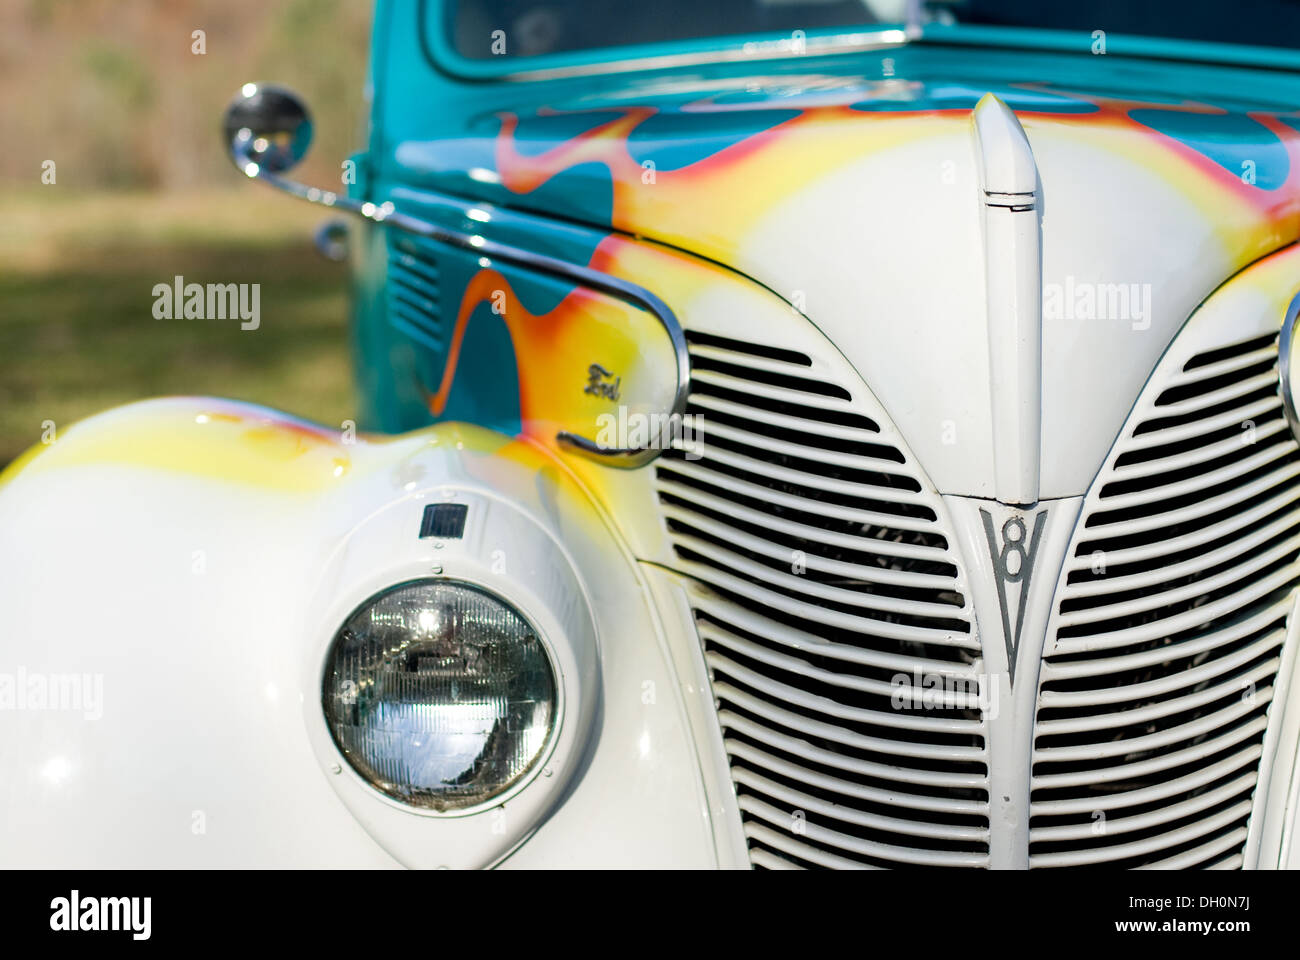 A 1939 Ford V8 hot rod, white front, with flames and a blue body. Stock Photo